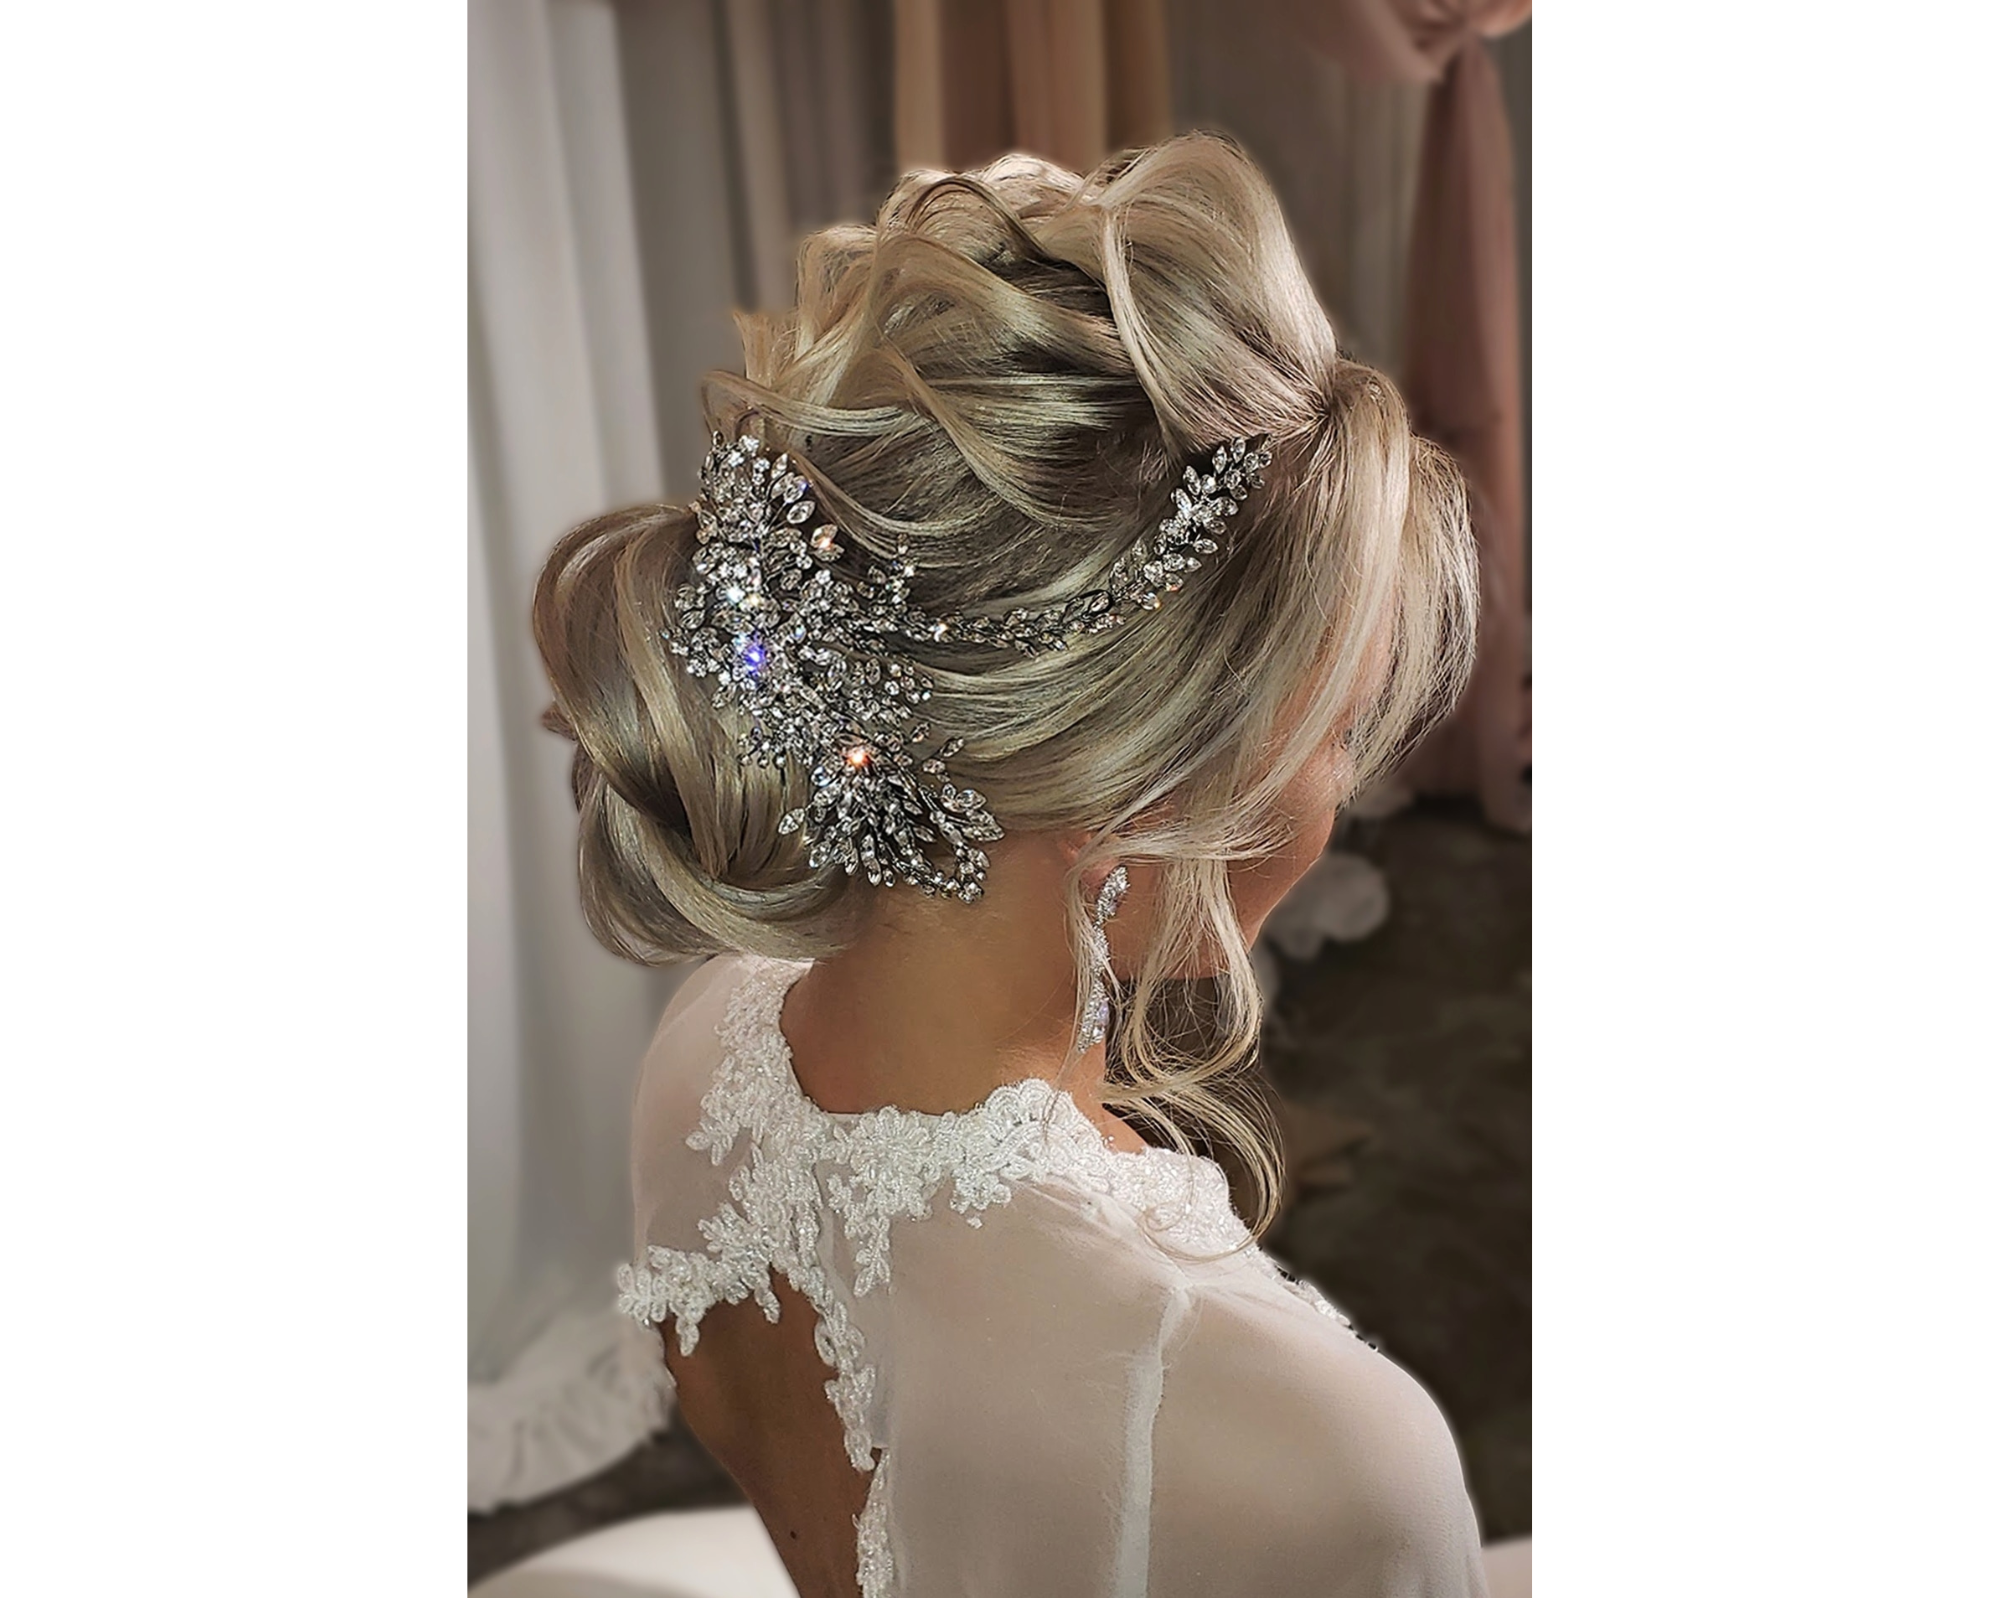 20 Trendy Low Bun Wedding Updos and Hairstyles 2023 | Medium hair styles,  Long hair styles, Up dos for medium hair